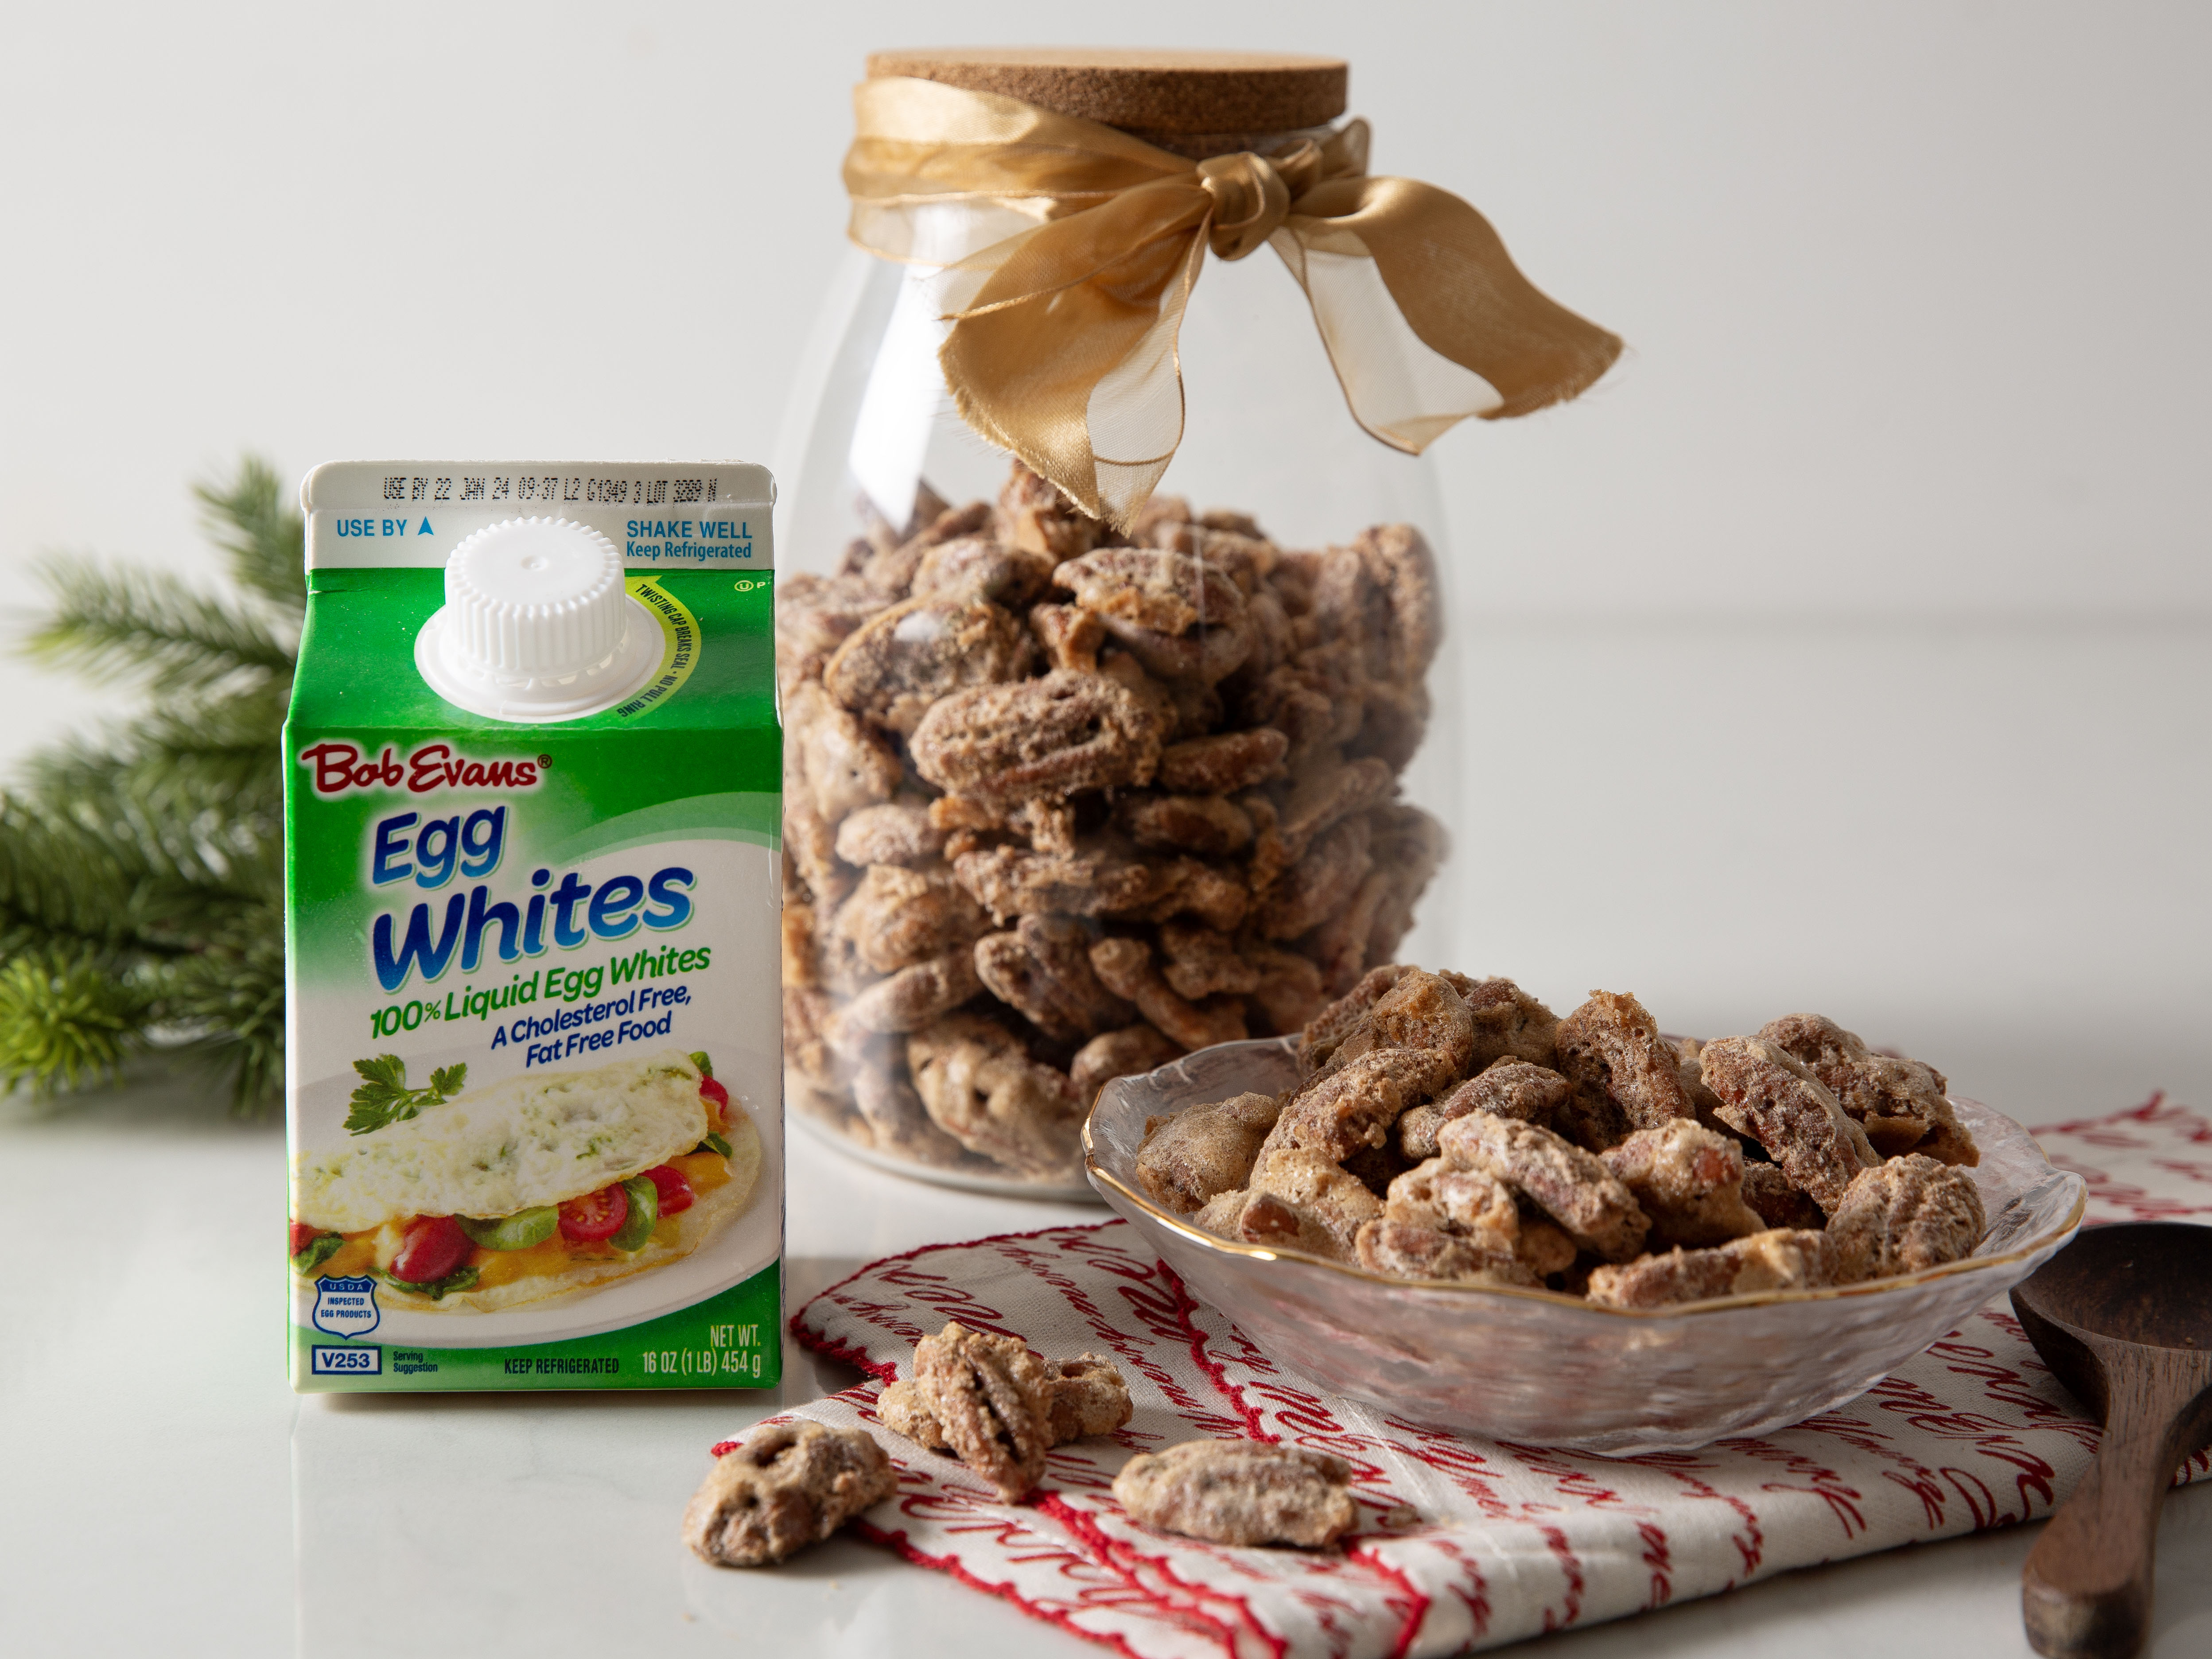 candied pecans in a dish and a jar next to a carton of Bob Evans 100% Liquid Egg Whites